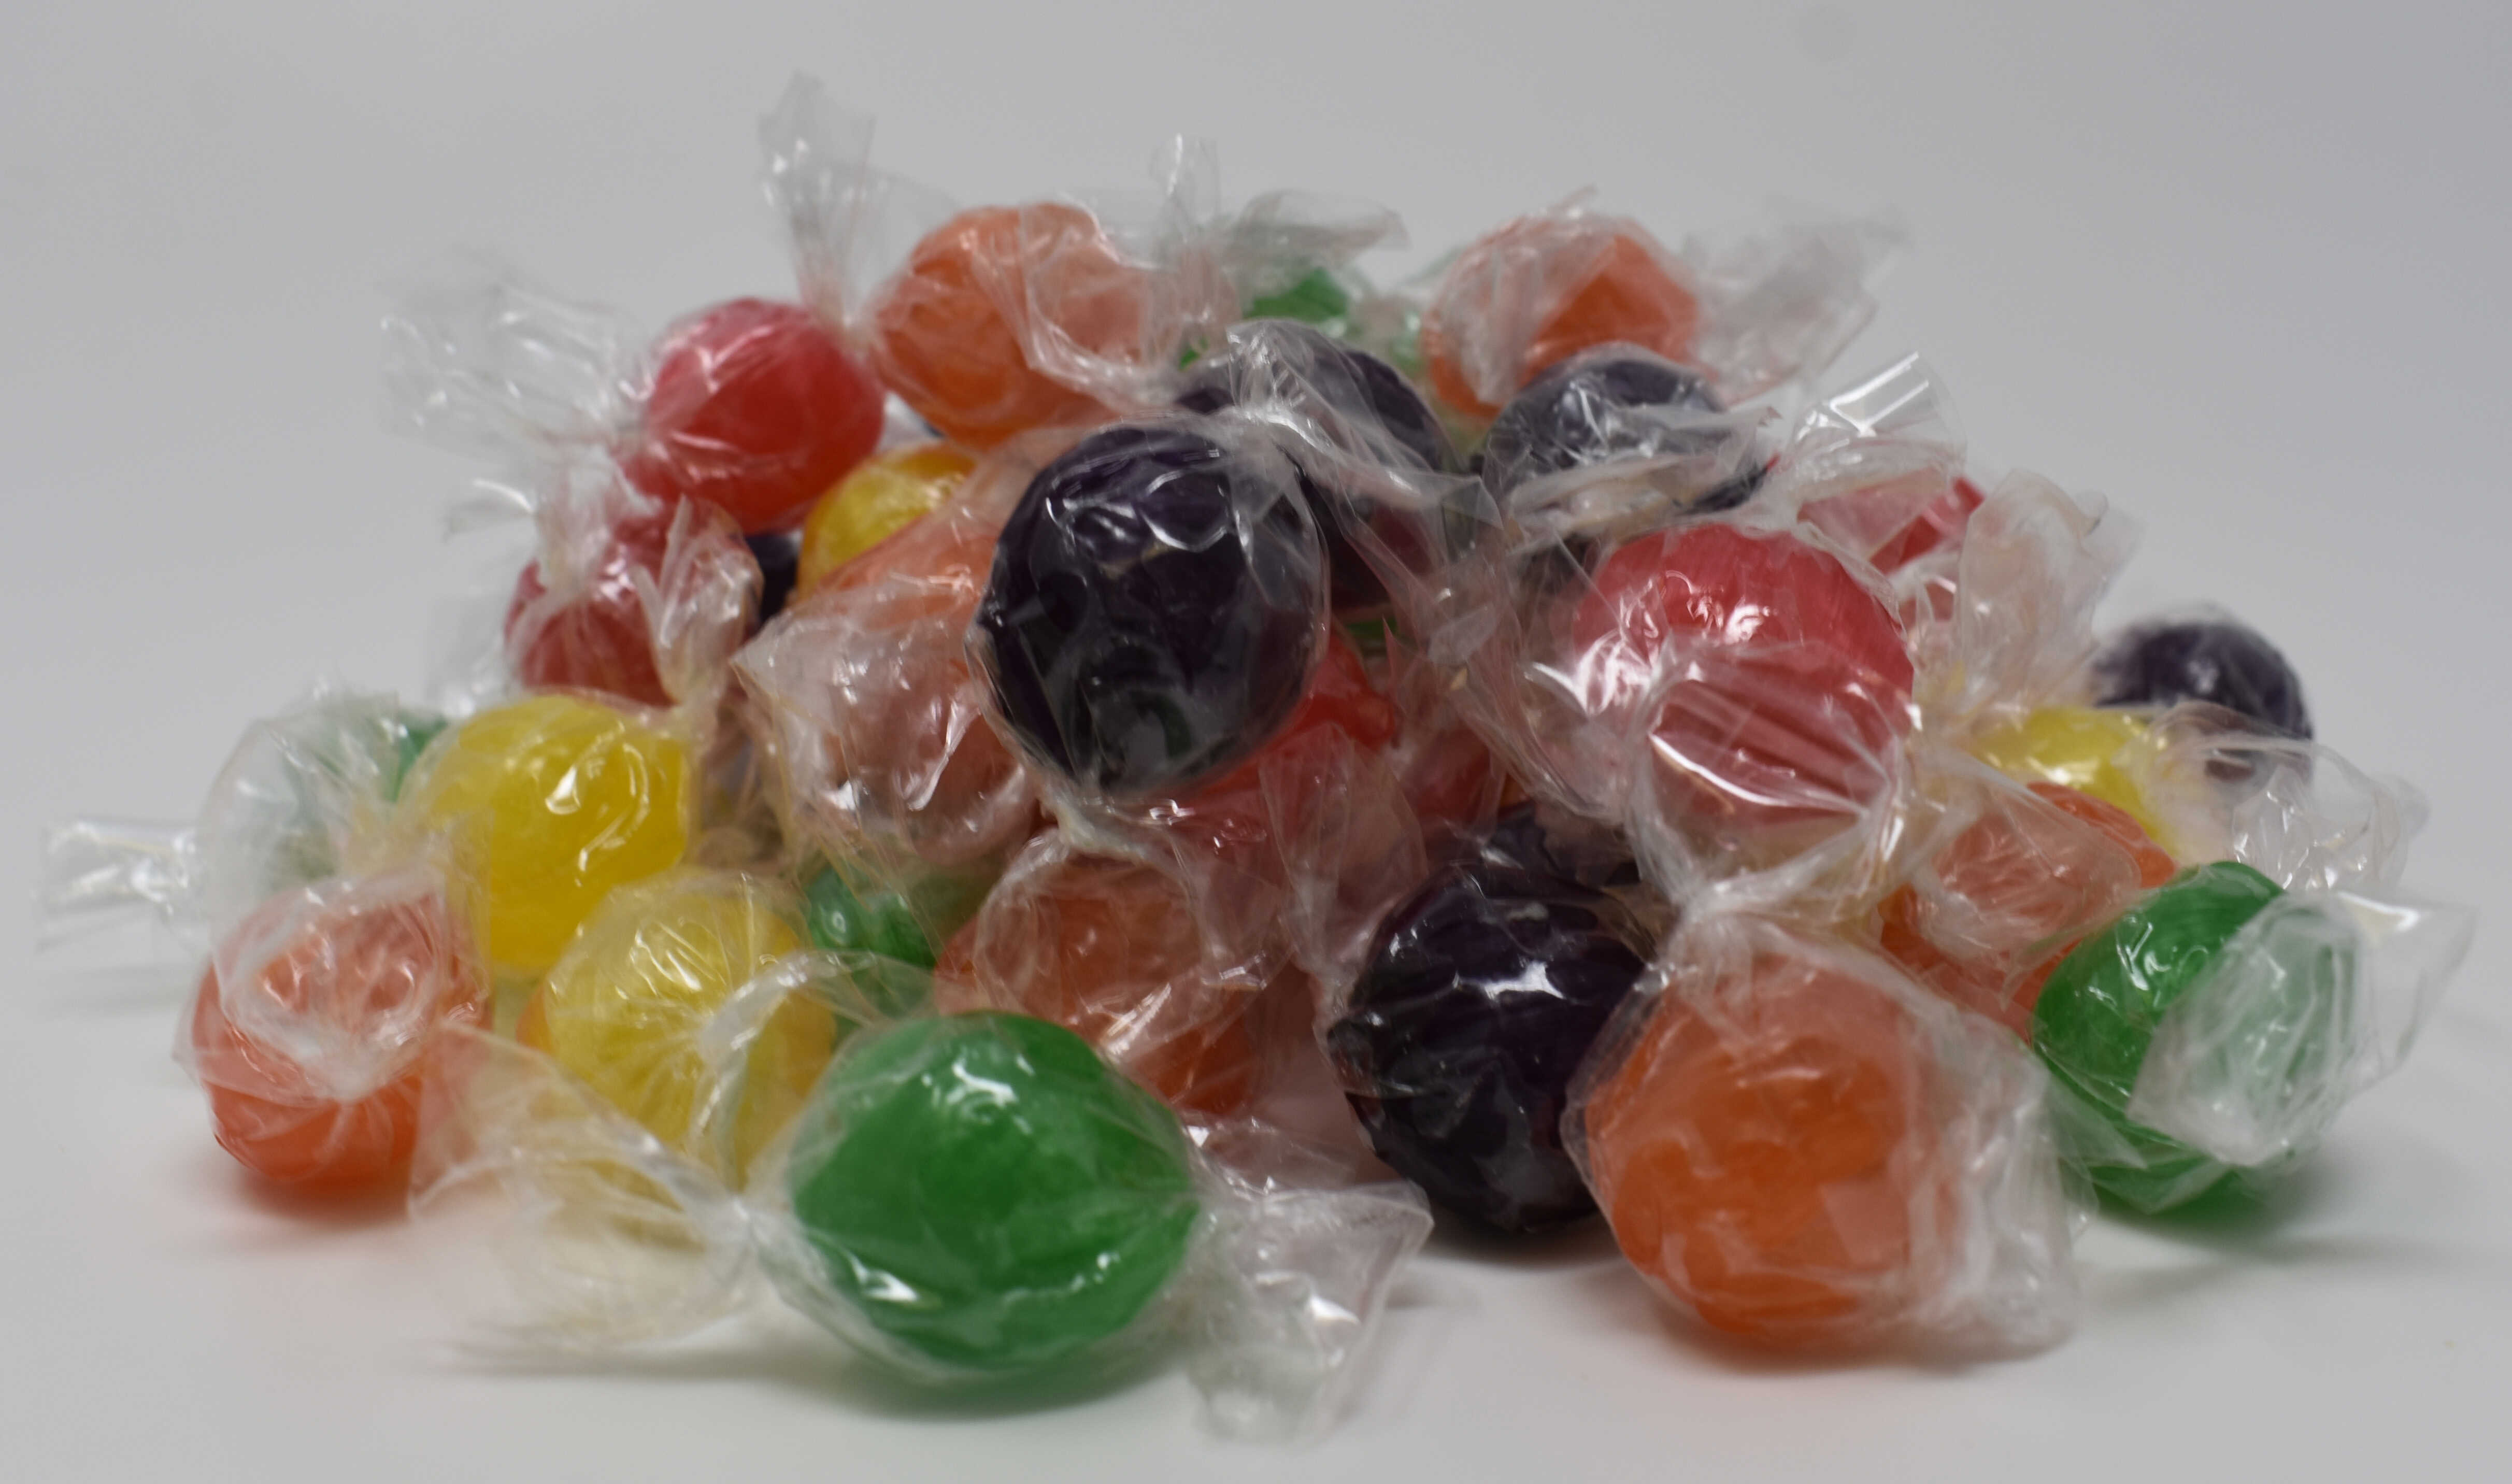 Sour Fruit Balls Candy - Side Photo